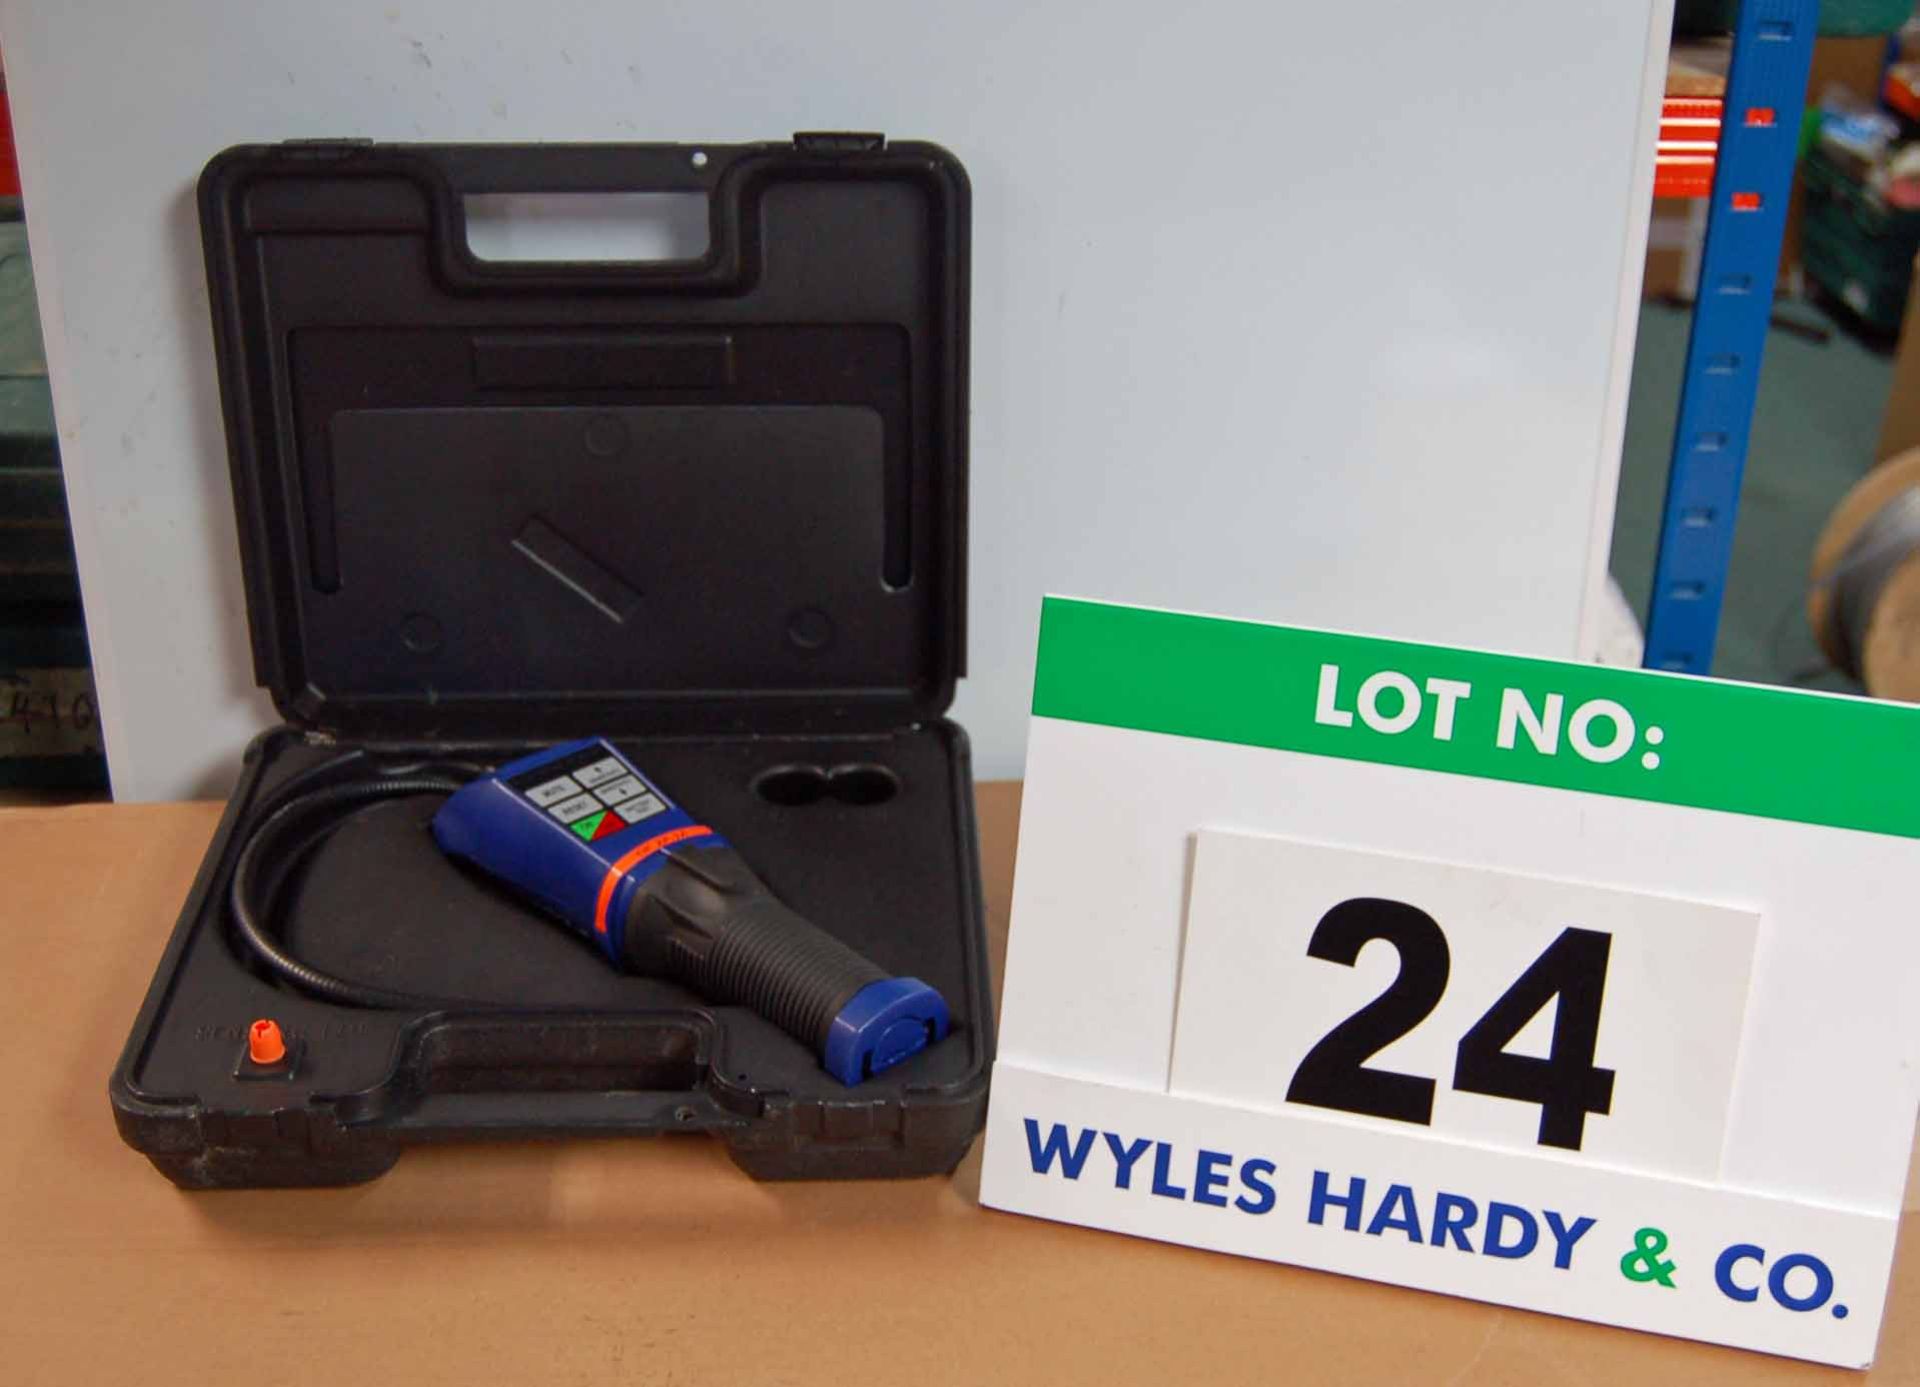 A TIF XP 1A Hand Held Refrigerant Leak Detection Wand (As Photographed)